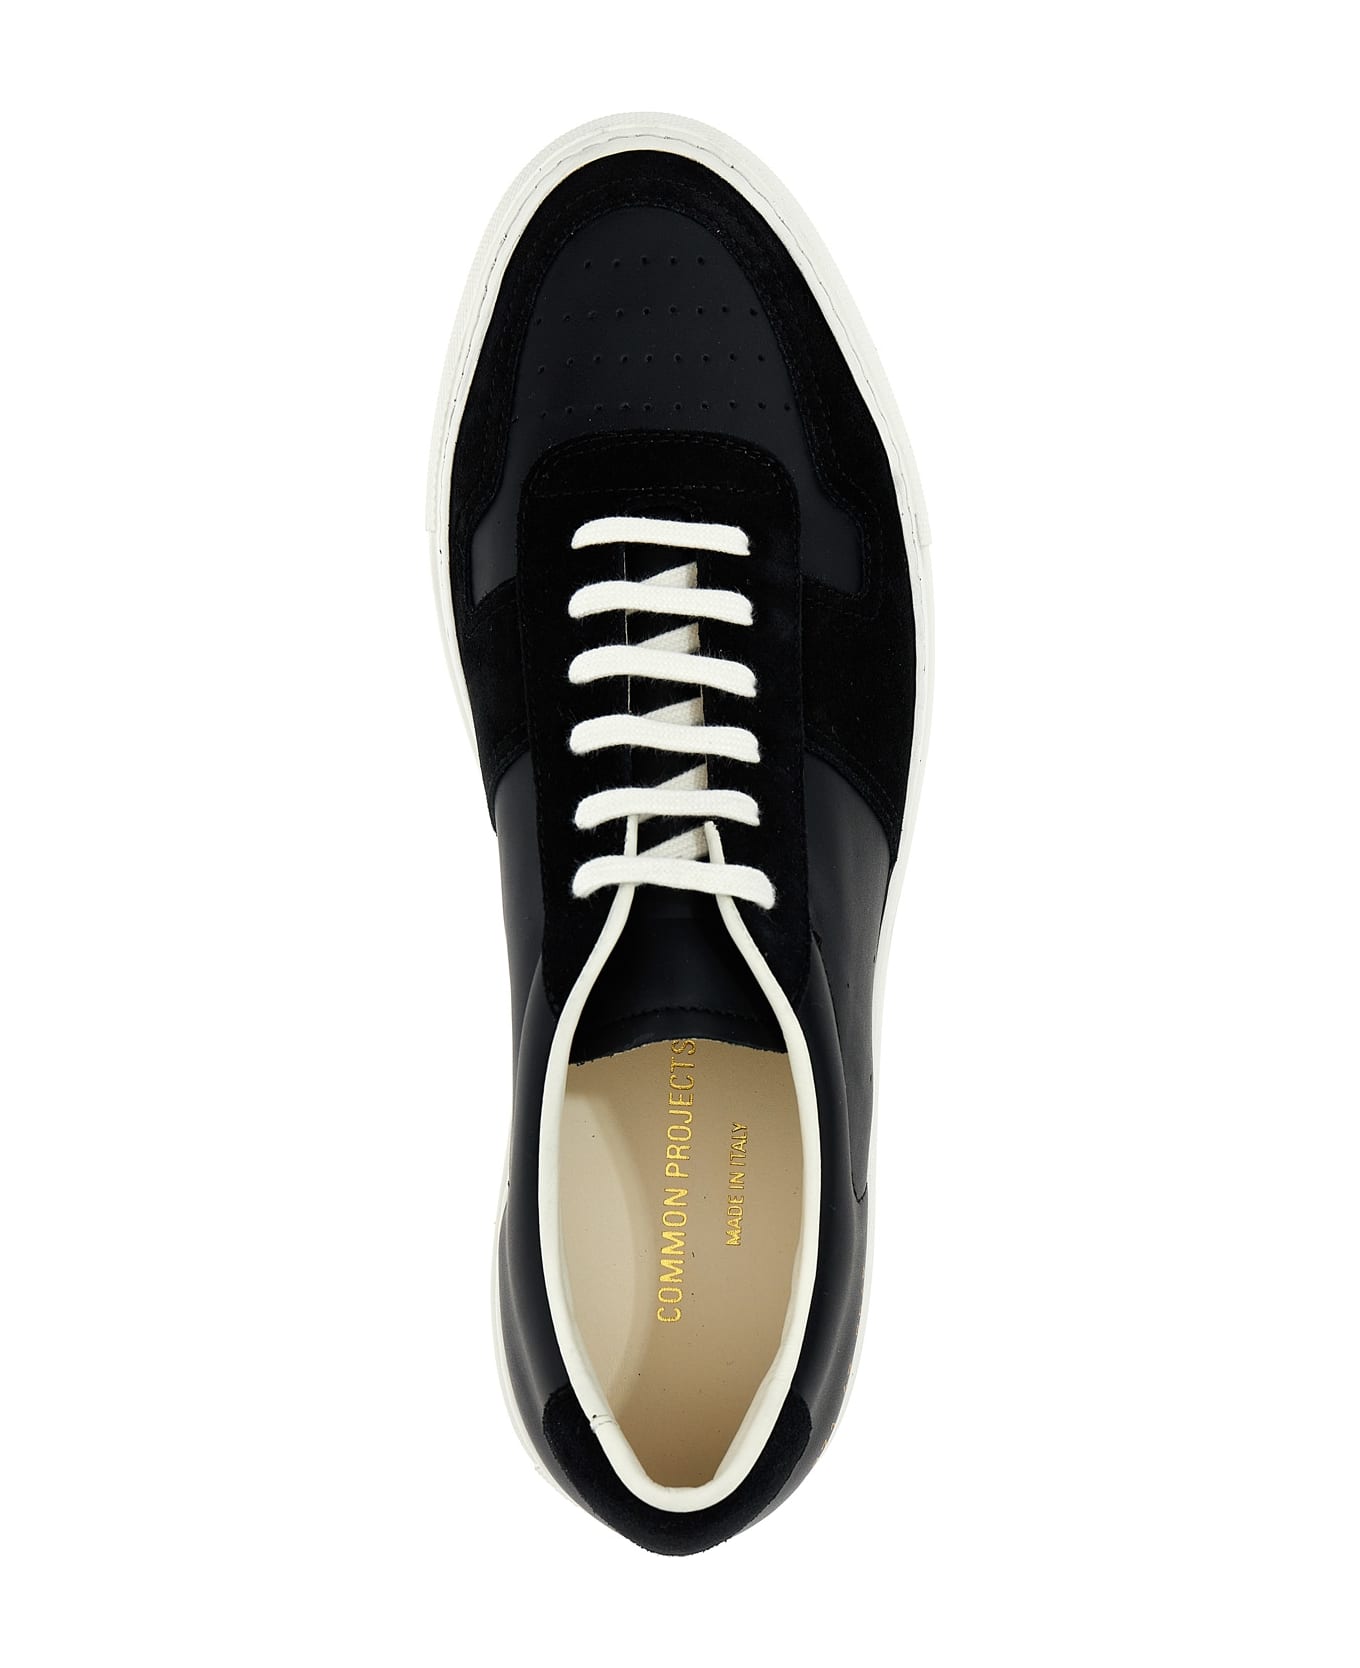 Common Projects Sneakers Bball Low - White/Black